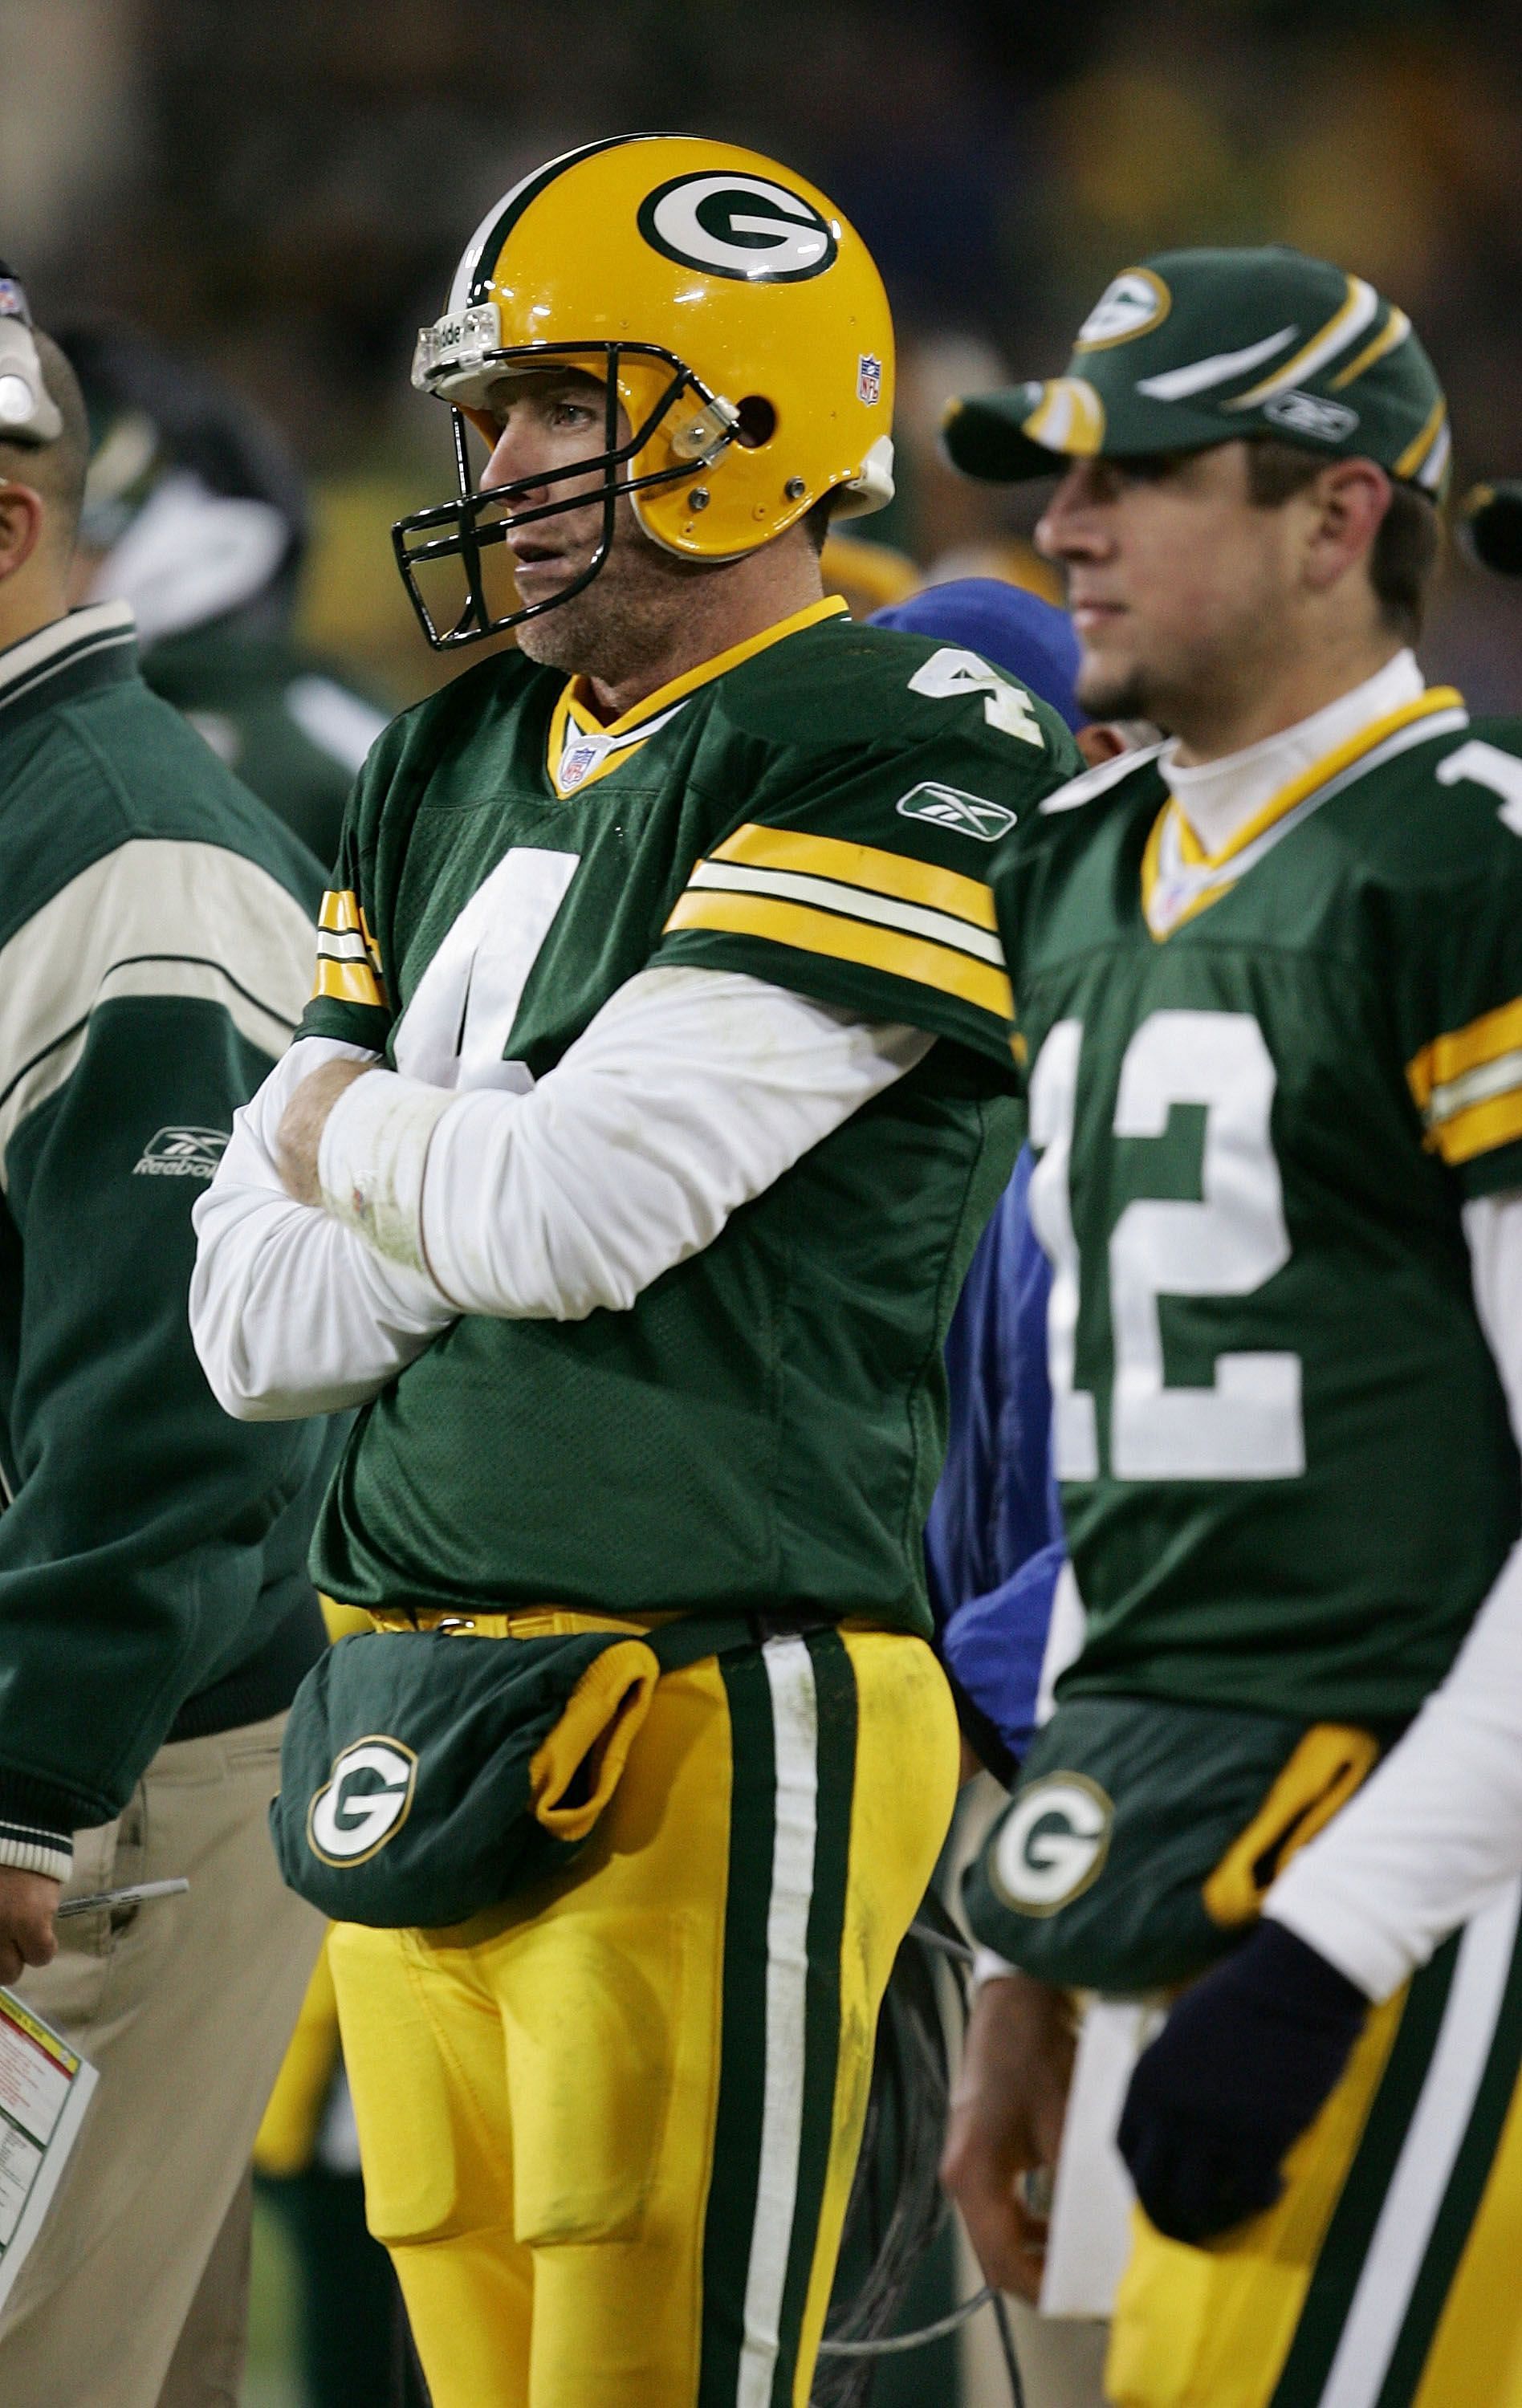 Green Bay Packers legends Brett Favre and Aaron Rodgers